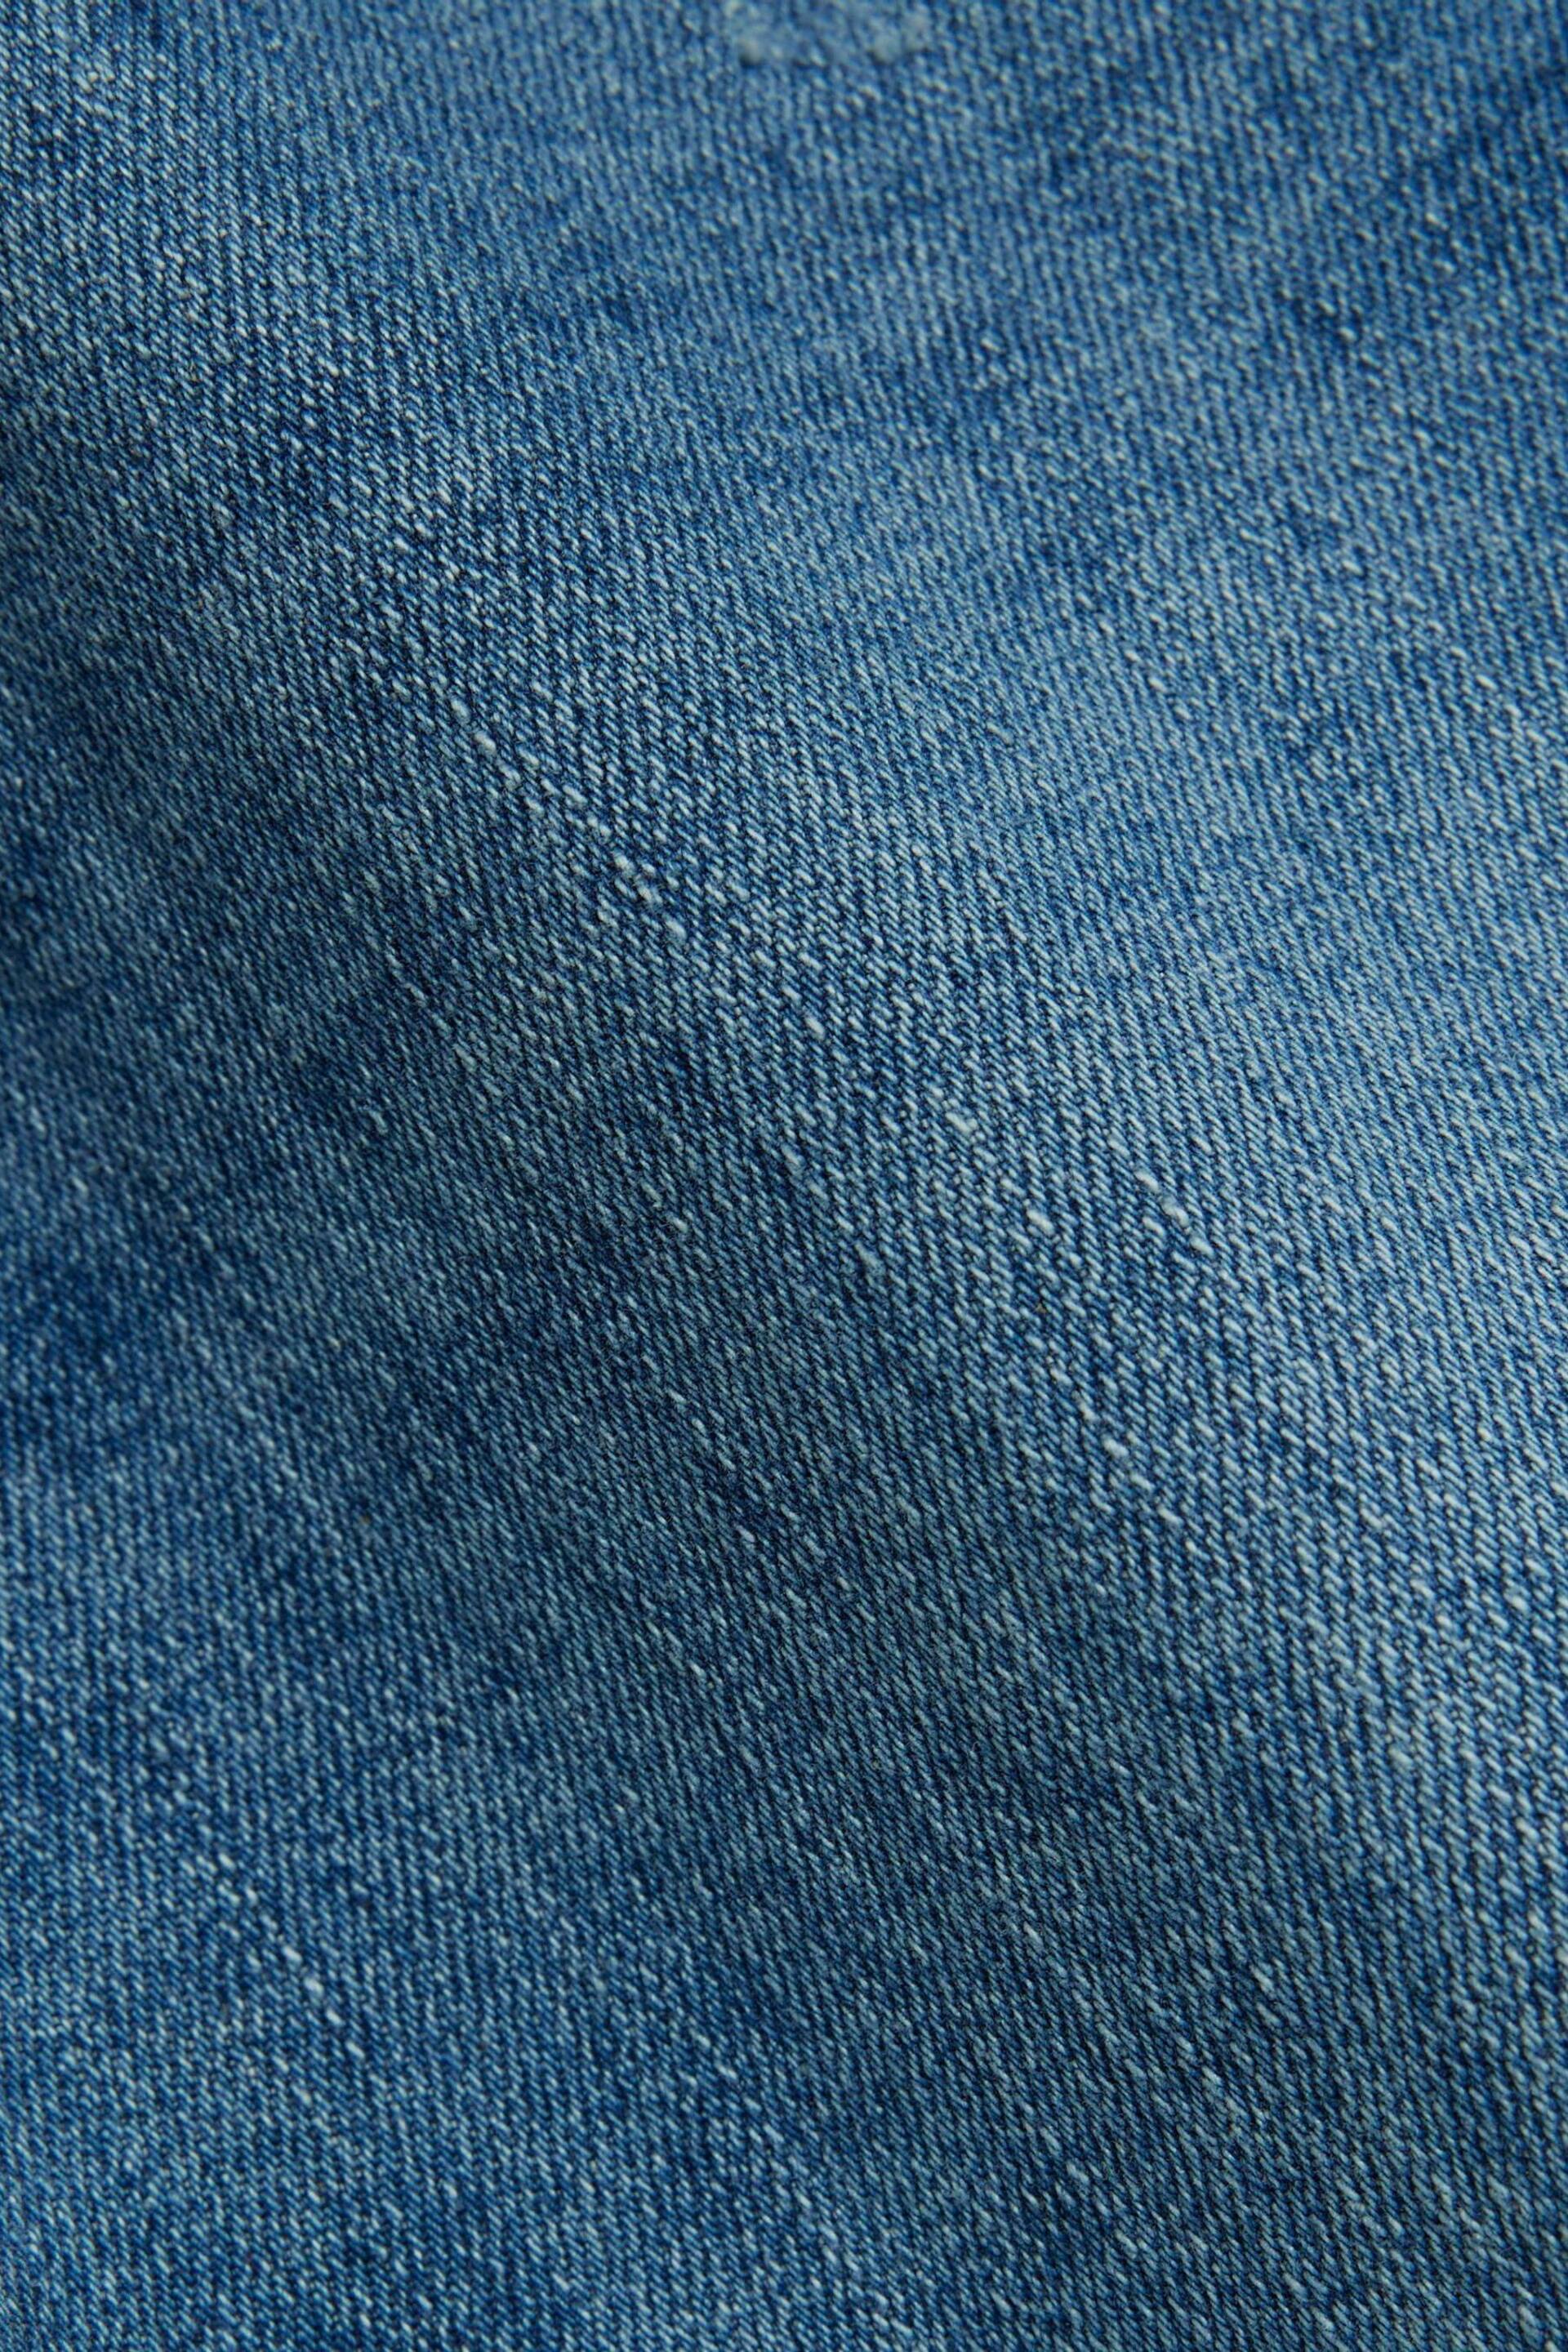 River Island Blue Petite Slim Fit High Rise Jeans - Image 5 of 5